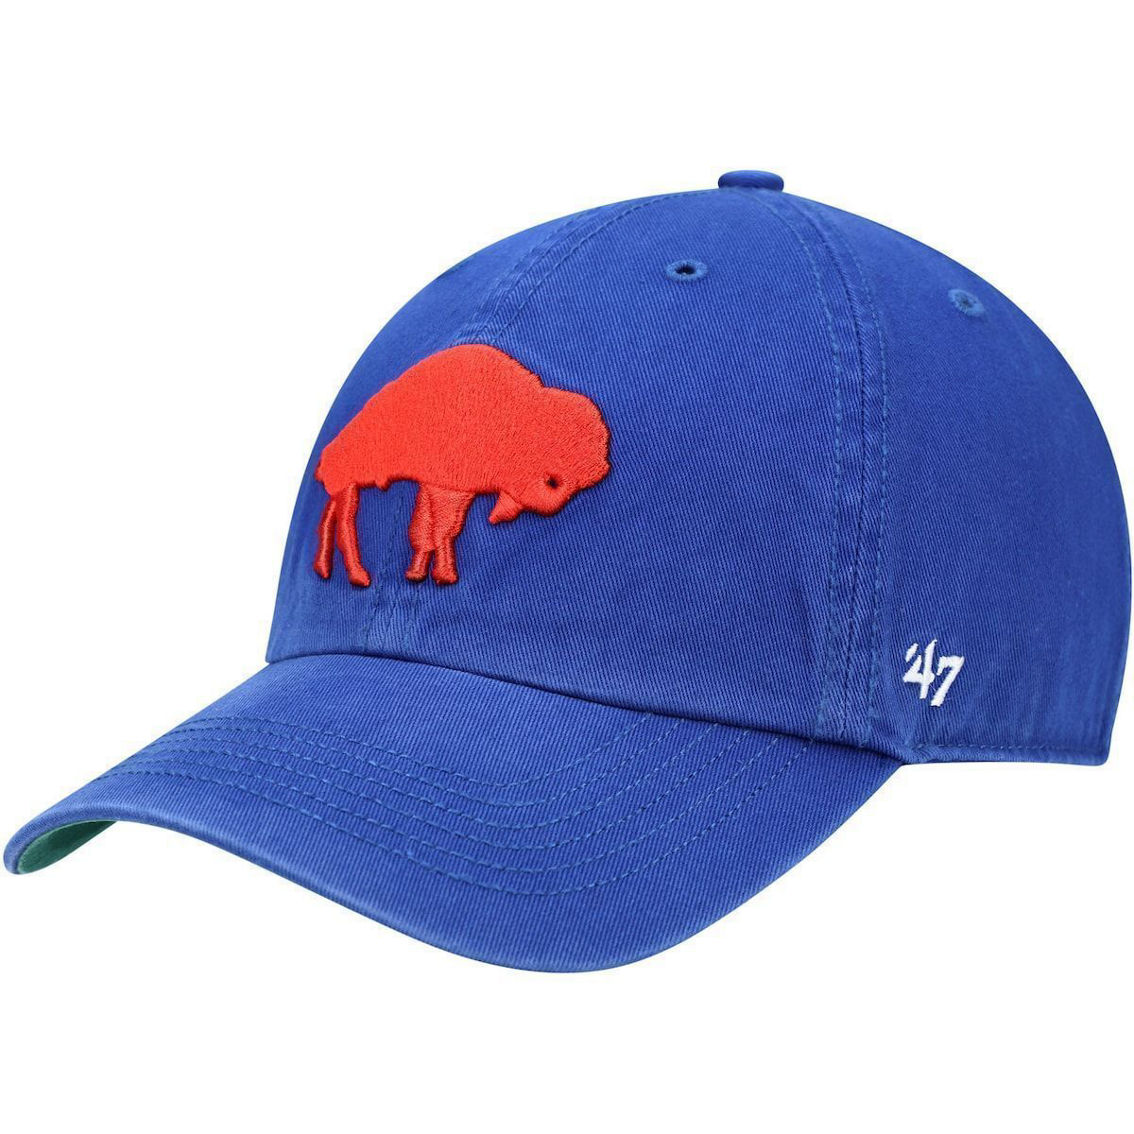 '47 Men's Royal Buffalo Bills Legacy Franchise Fitted Hat - Image 2 of 4